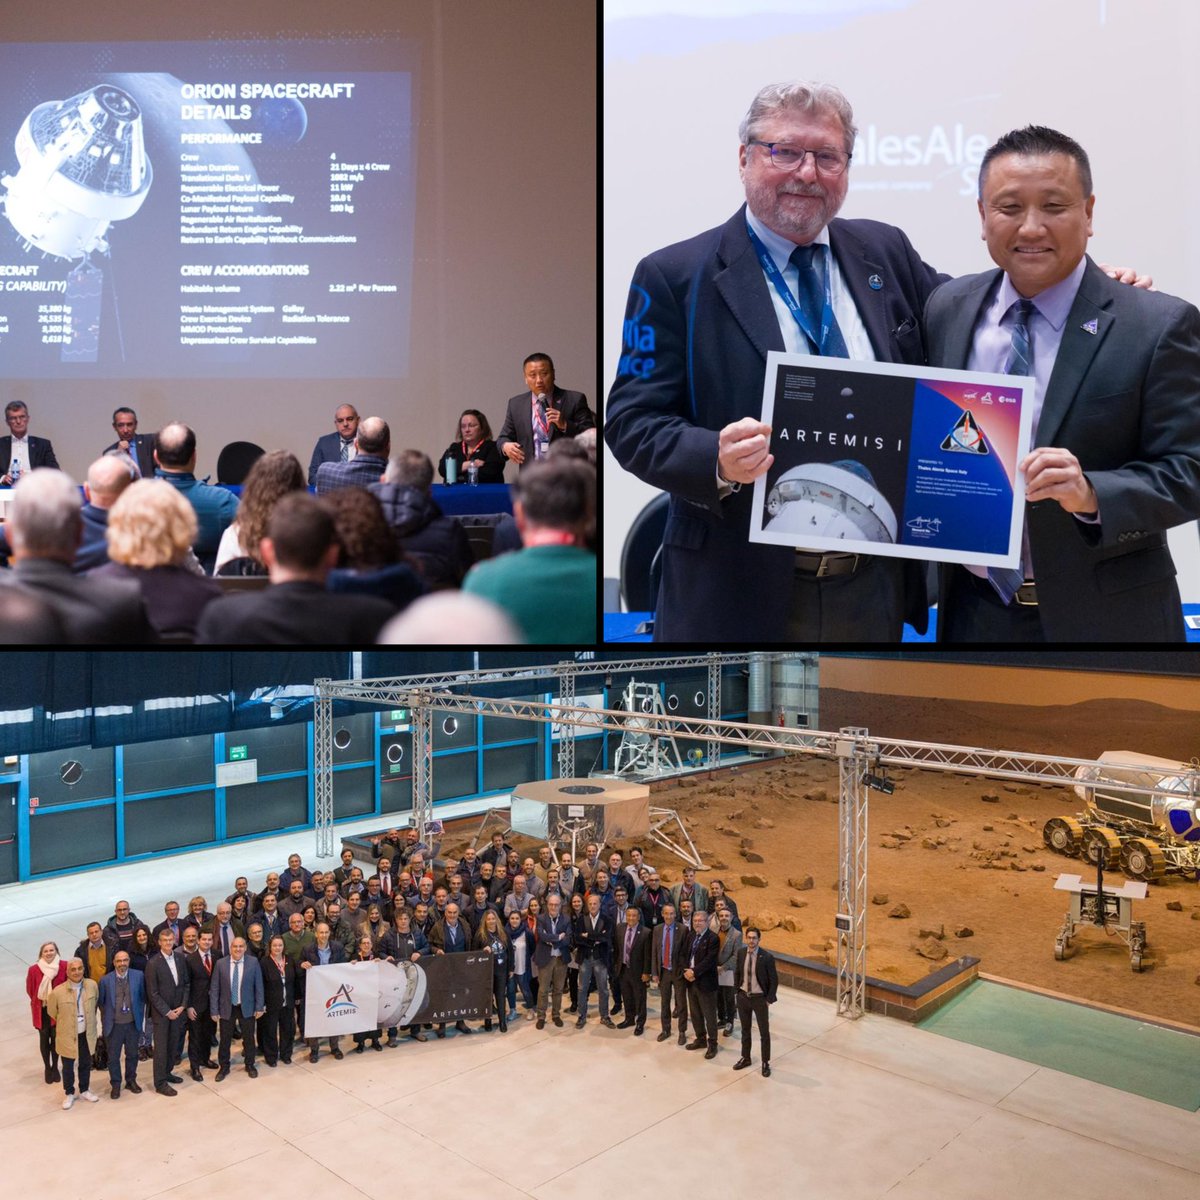 @NASA_Orion @Thales_Alenia_S @esa Today in #Turin we celebrate together with ,  &amp; , our people and teams involved in _Orion &amp; the success of Artemis #1, paving the way to the return of humanity on the Moon 🌕 #spaceforlife